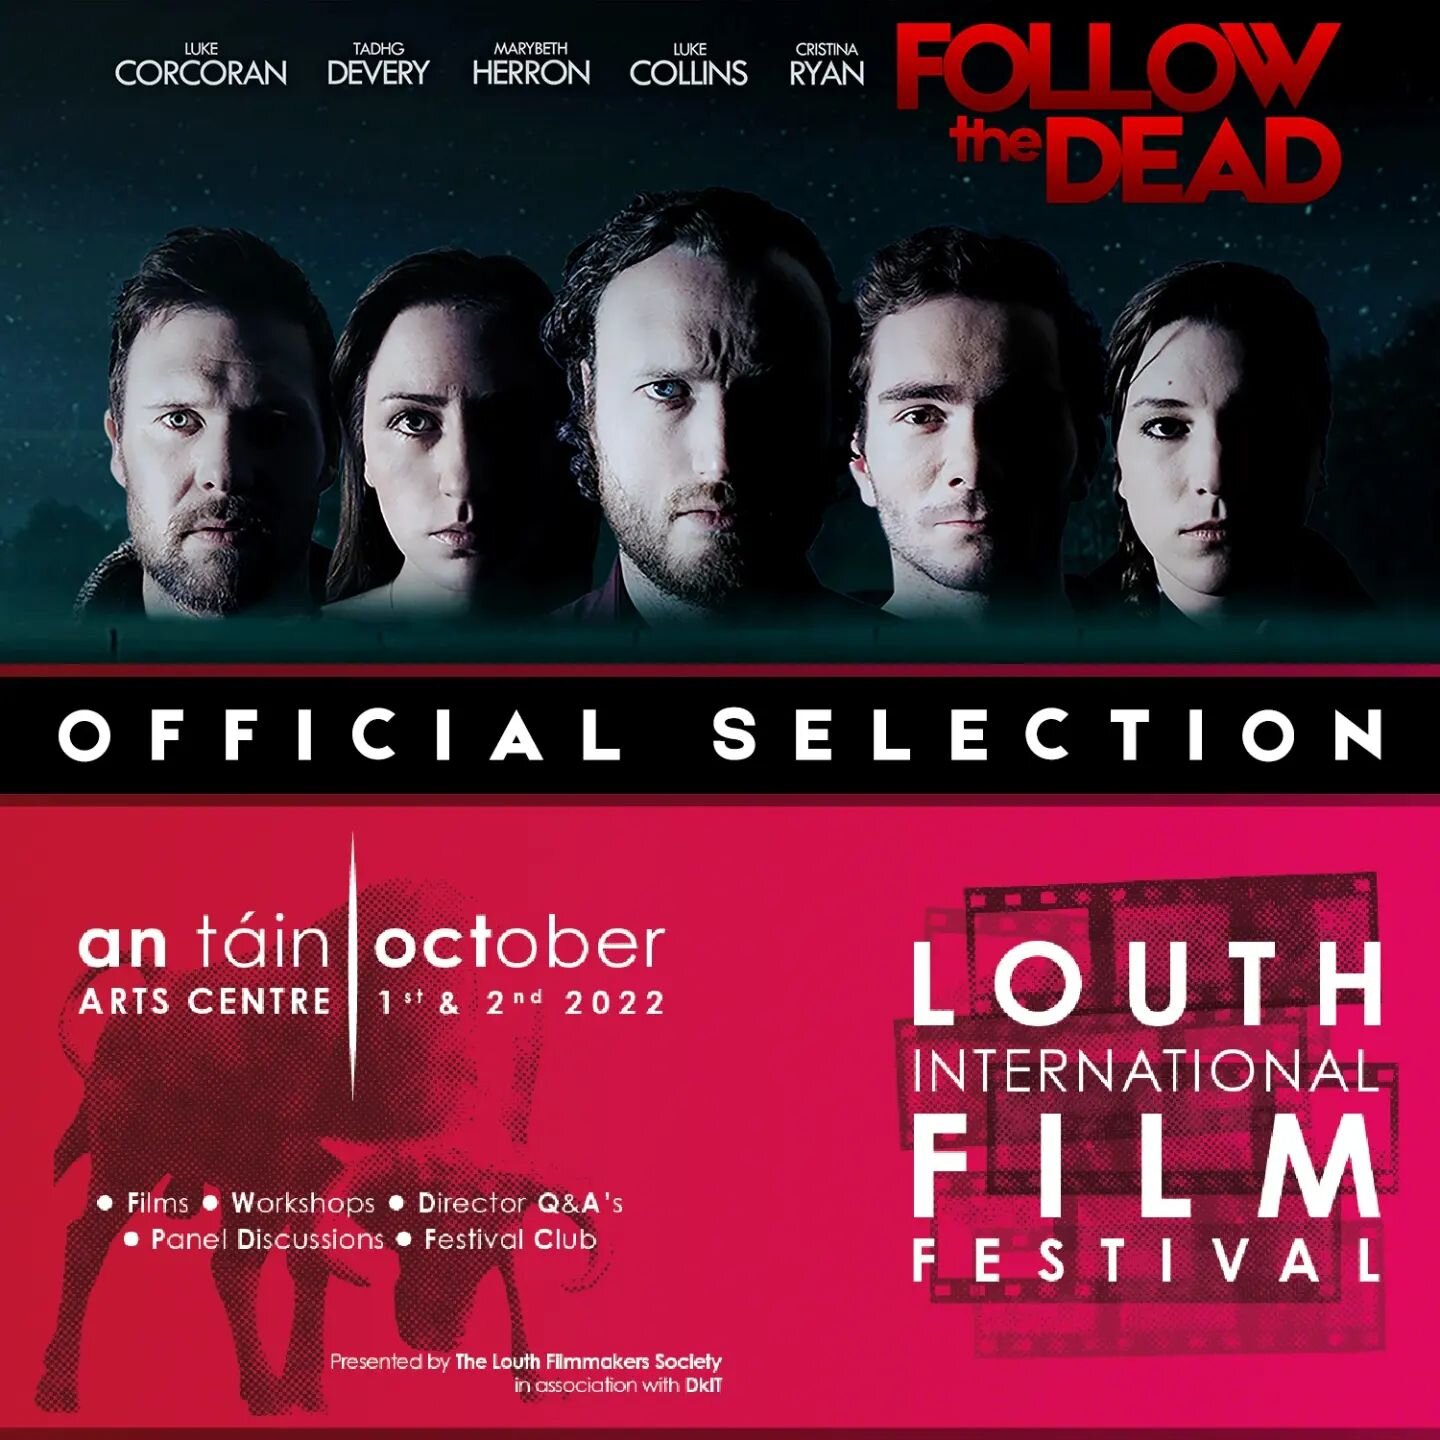 &hearts;️ BIG LOVE FROM THE WEE COUNTY 🤍

We're blessed to announce the official selection of Follow the Dead at the Louth International Film Festival, which takes place in Dundalk from the 1st of October ✨🧟&zwj;♂️

Thank you so much @louthinternat